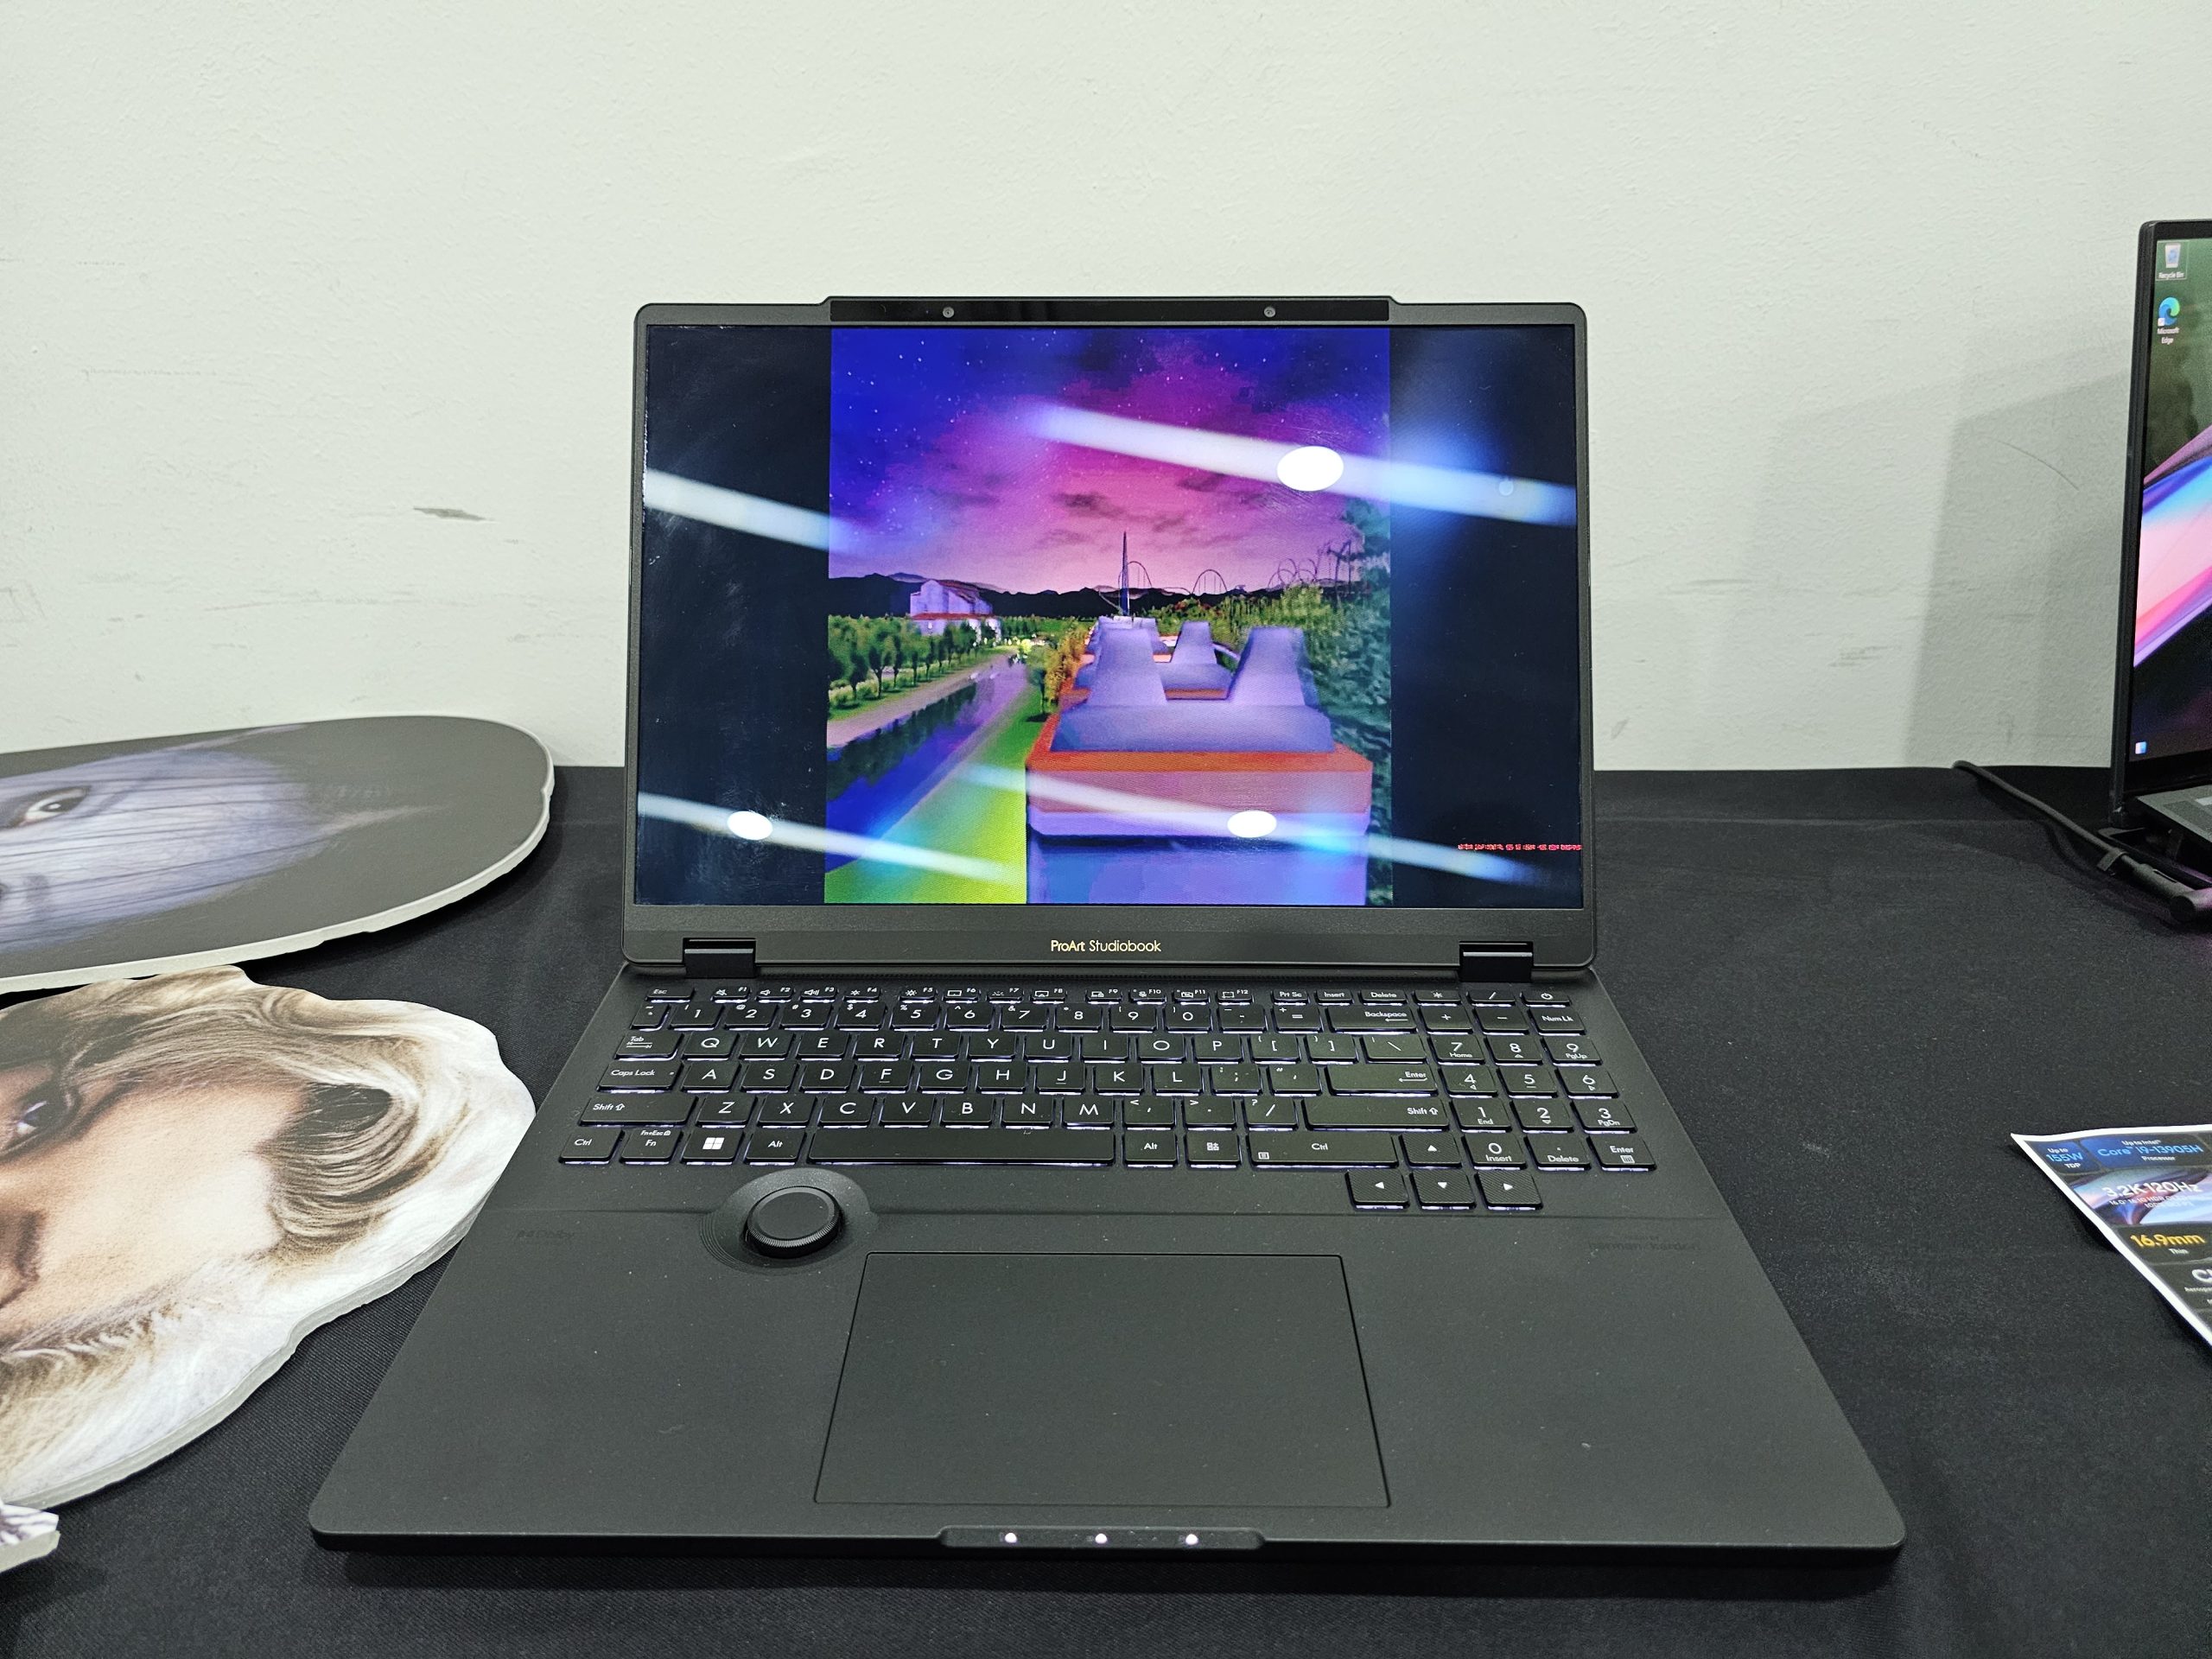 Hands On With Latest ASUS Laptop Lineup At ASUS CES 2023 Media Tour 10